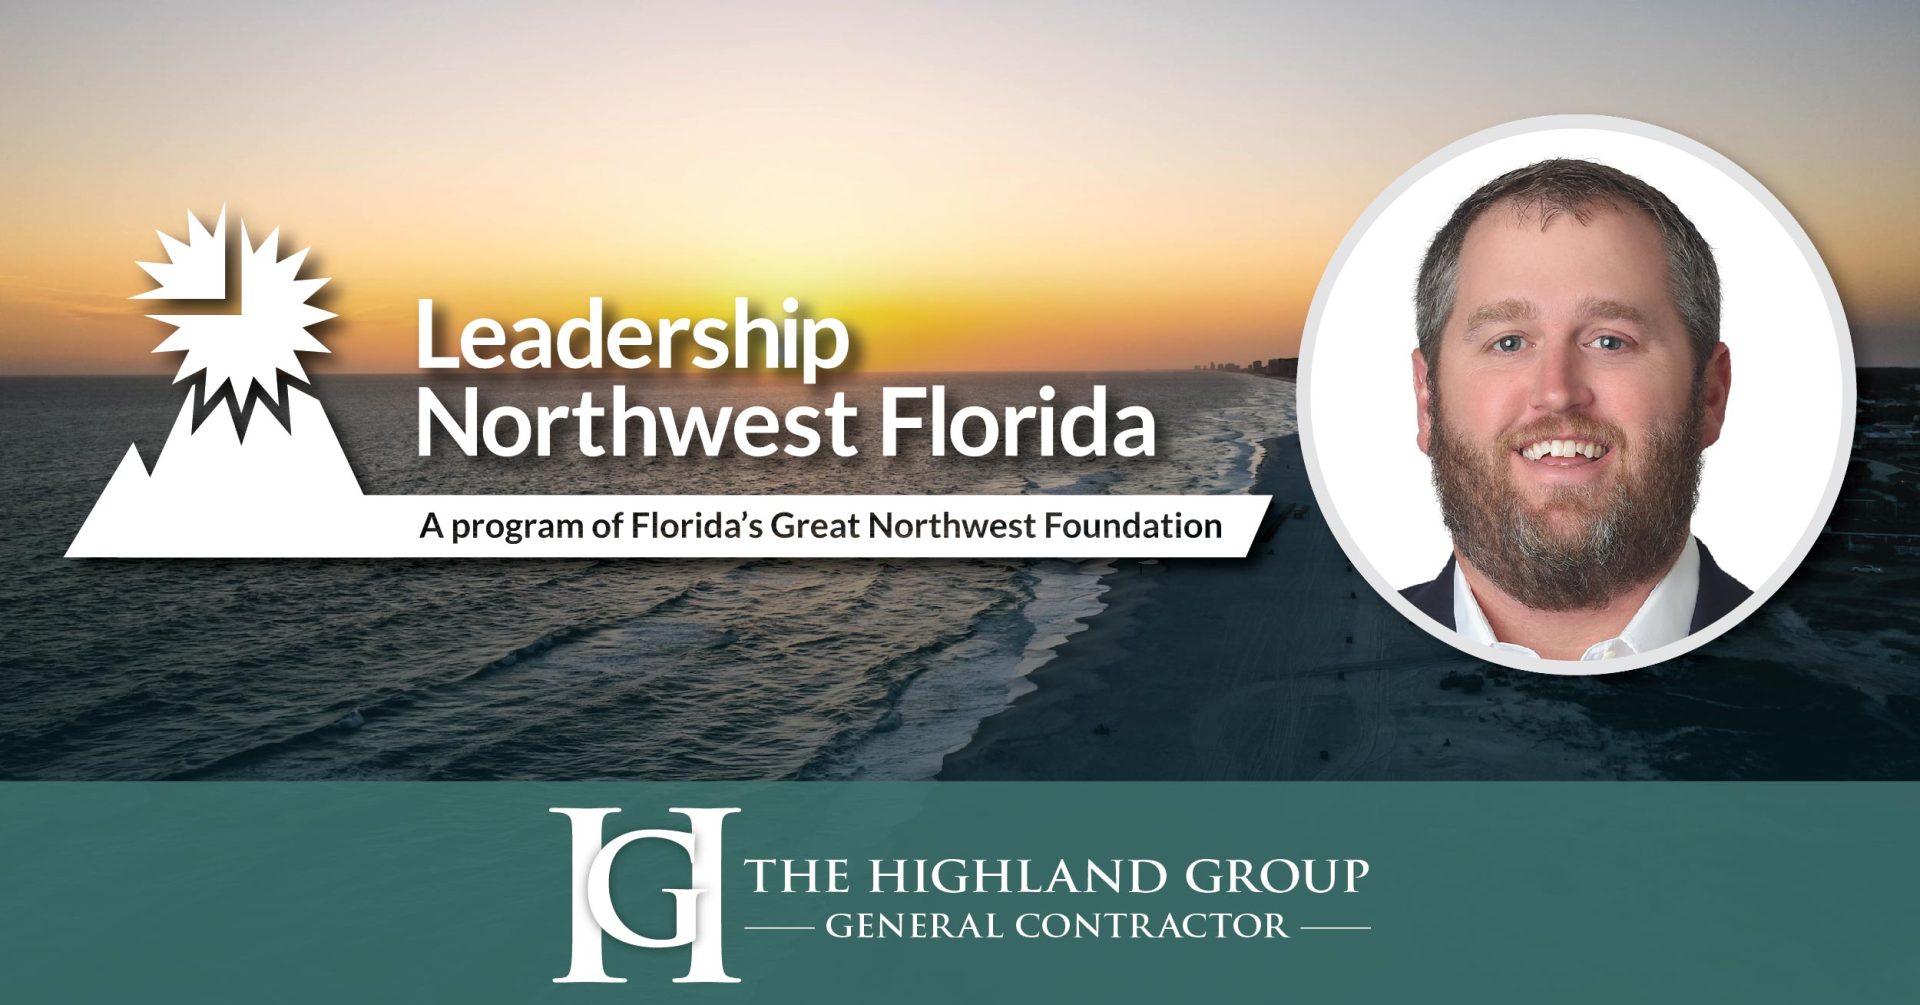 Highland’s VP of Preconstruction Selected for Inaugural Leadership Class in Northwest Florida